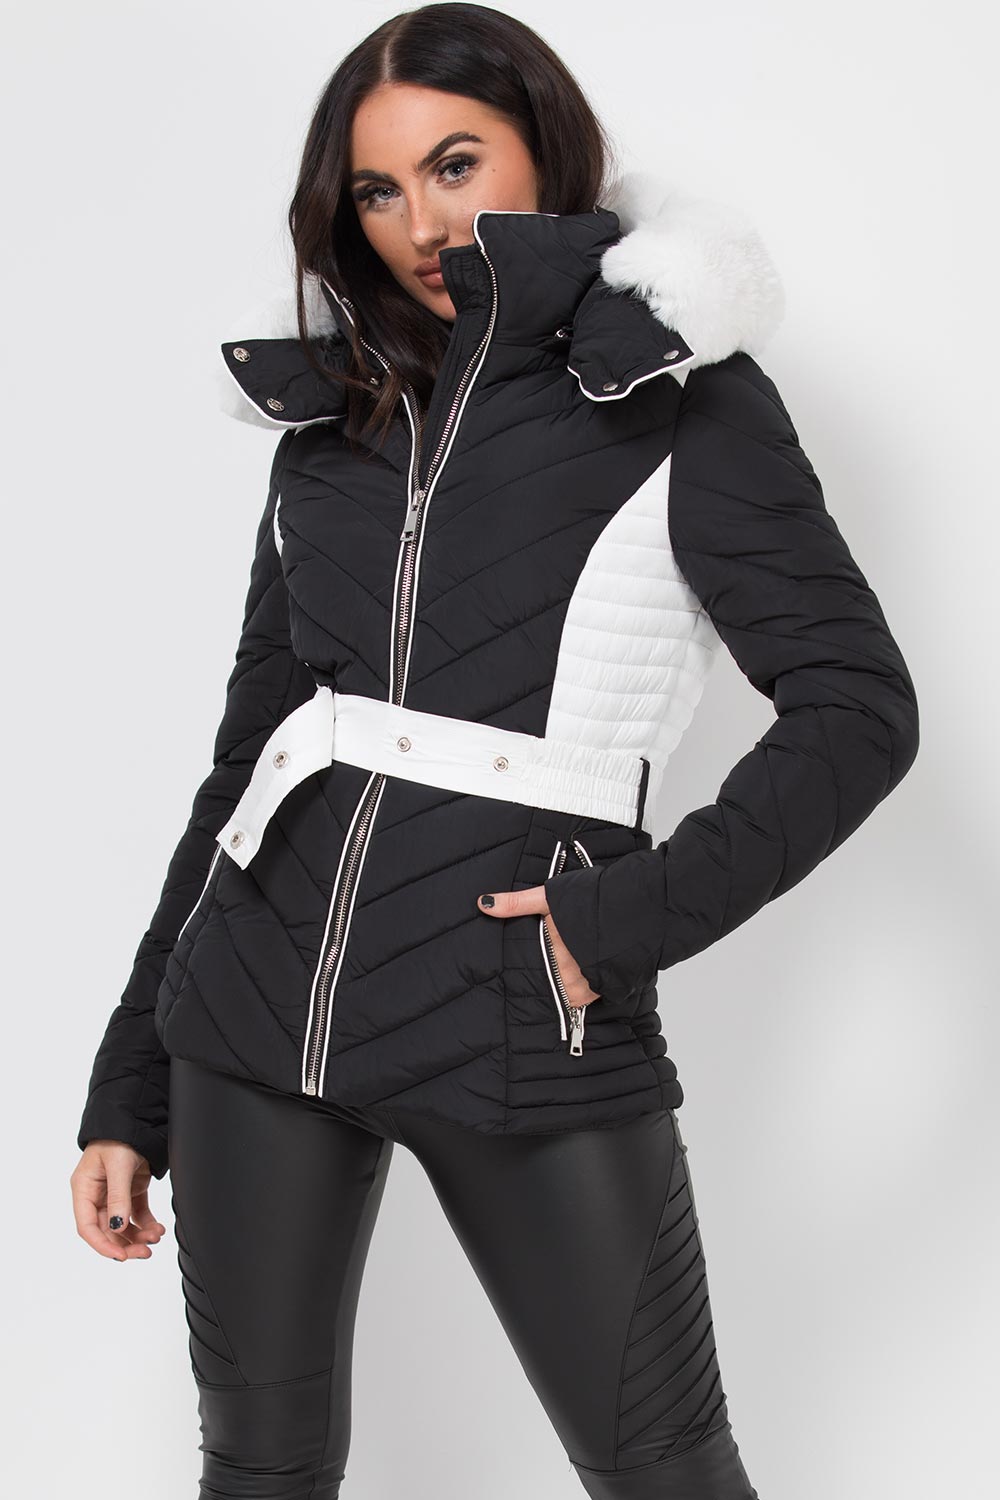 womens puffer jacket black and white